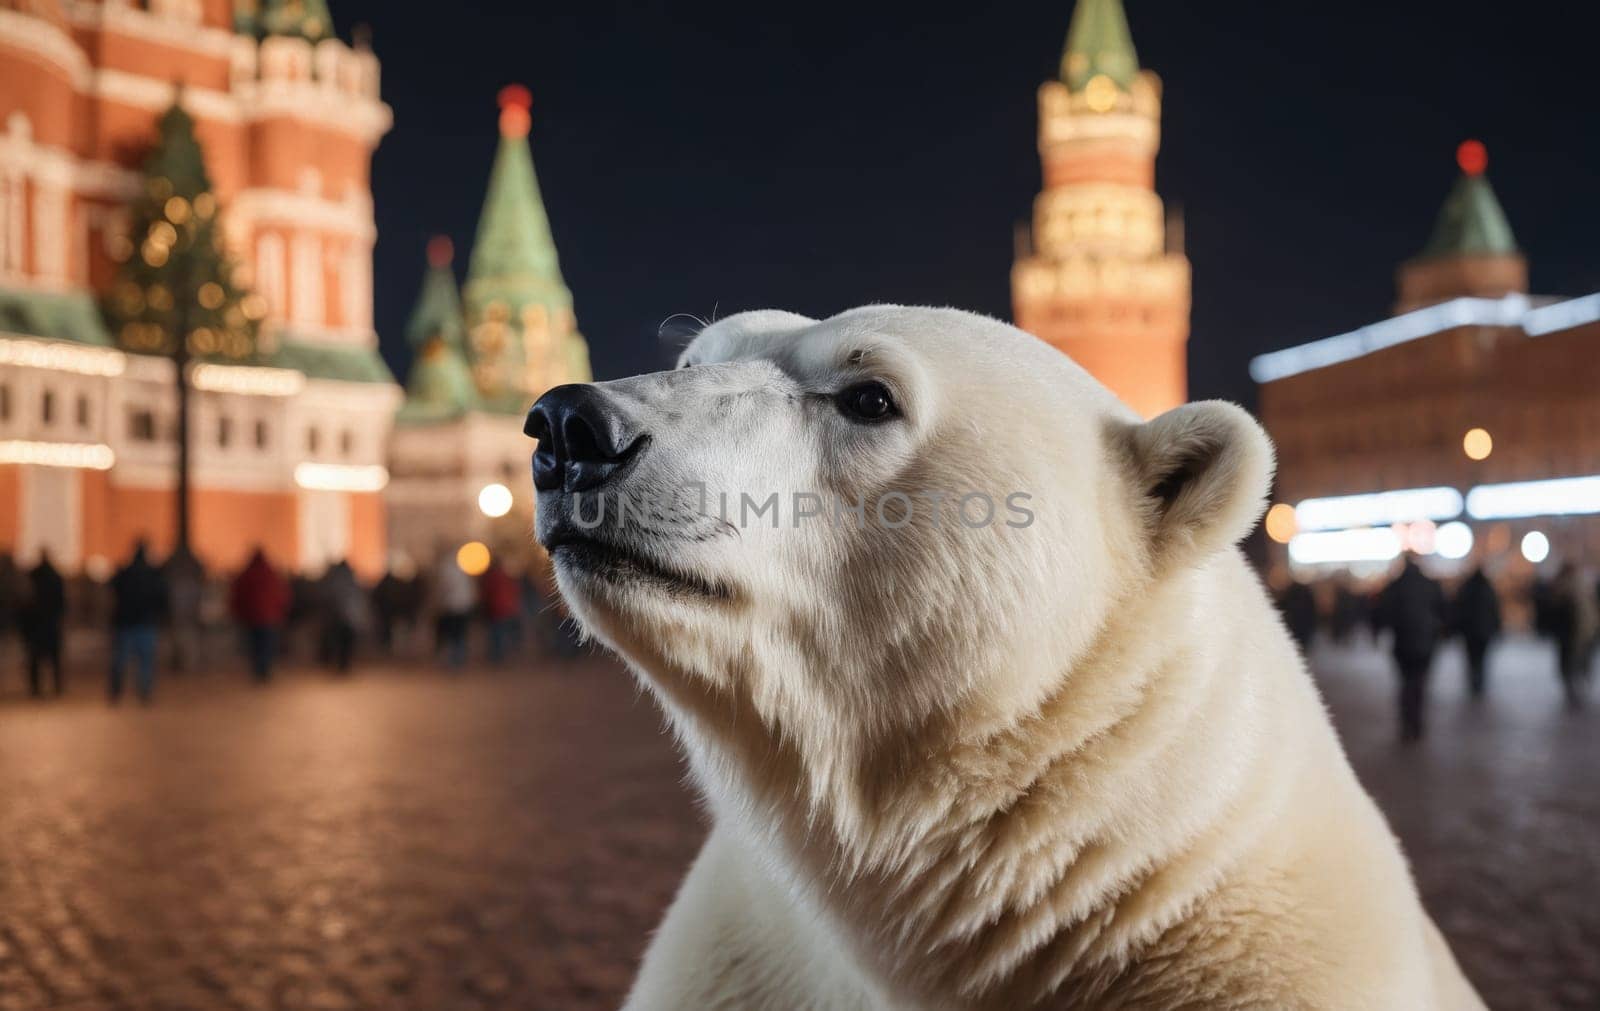 A dream-like image portraying a polar bear walking in the Red Square, posing an intriguing juxtaposition of Arctic life and cityscape.